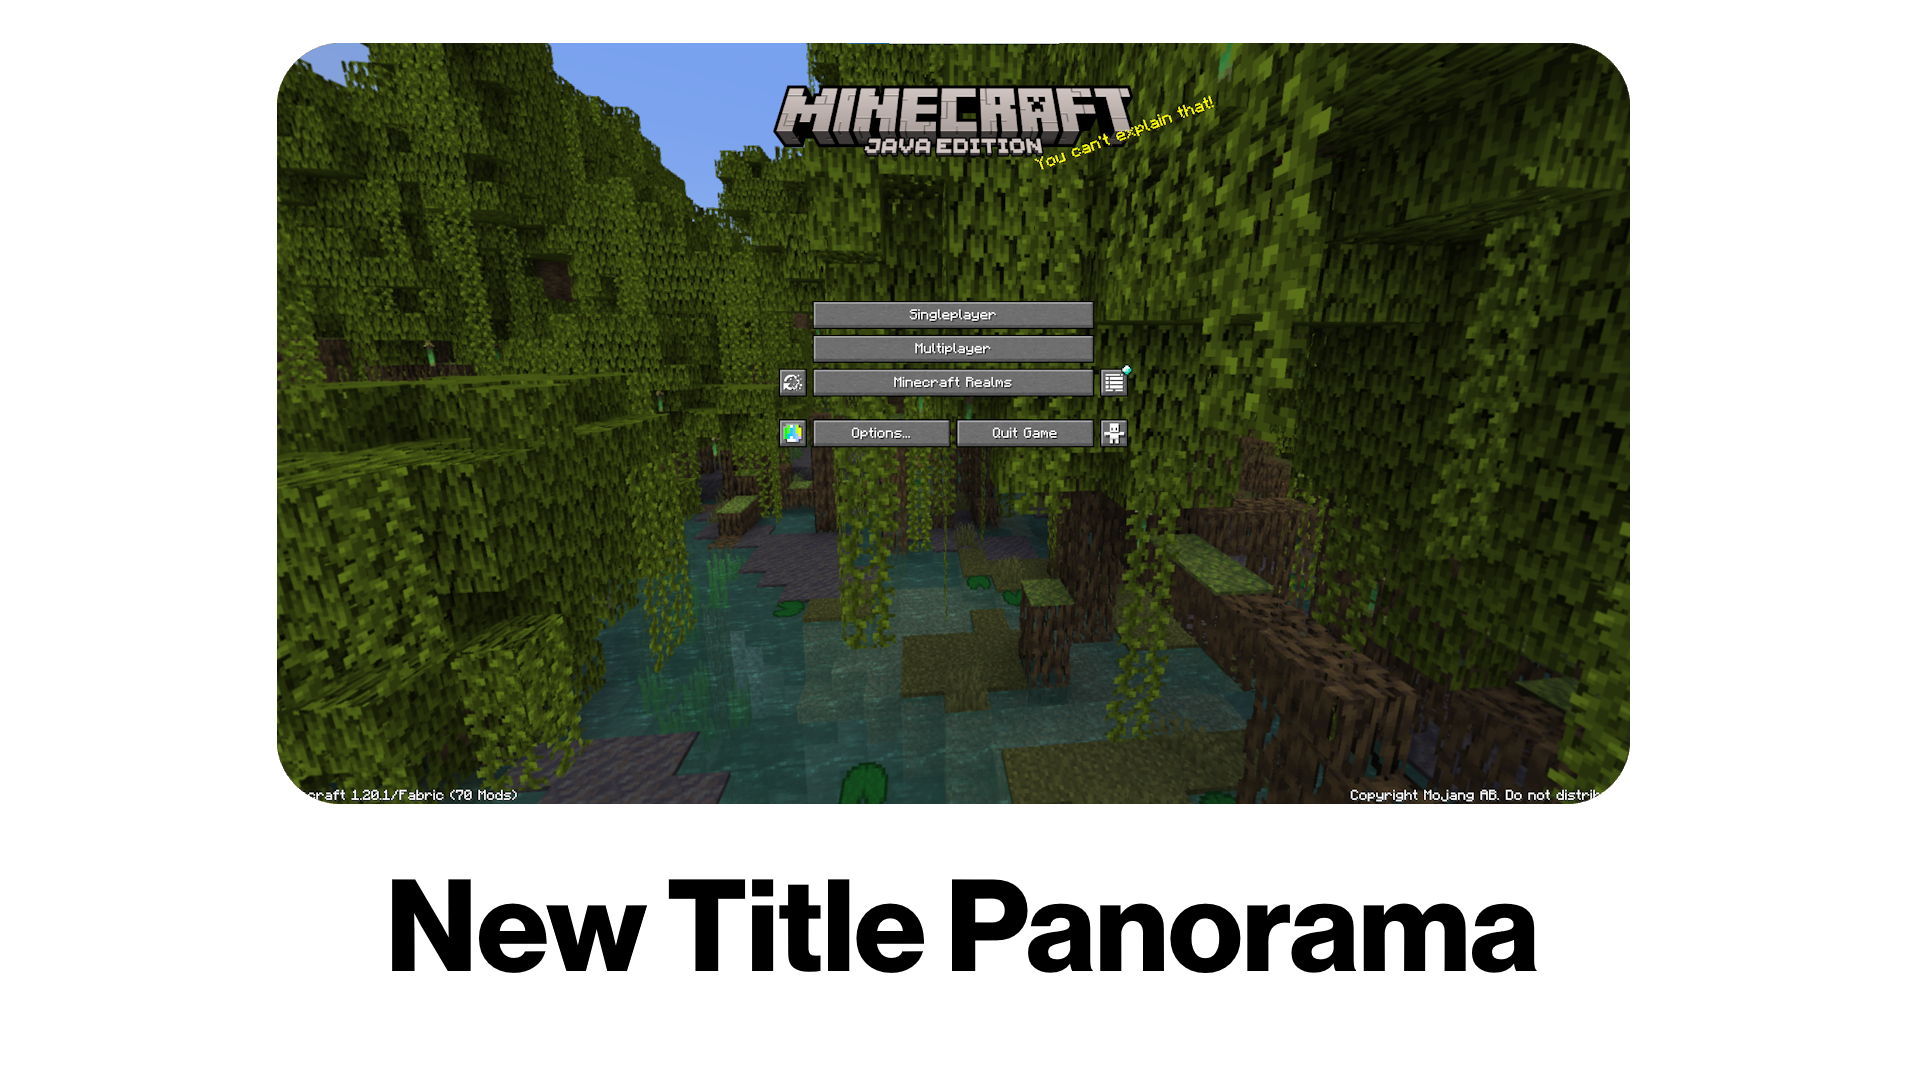 PixelPack adds a new Title Panorama.